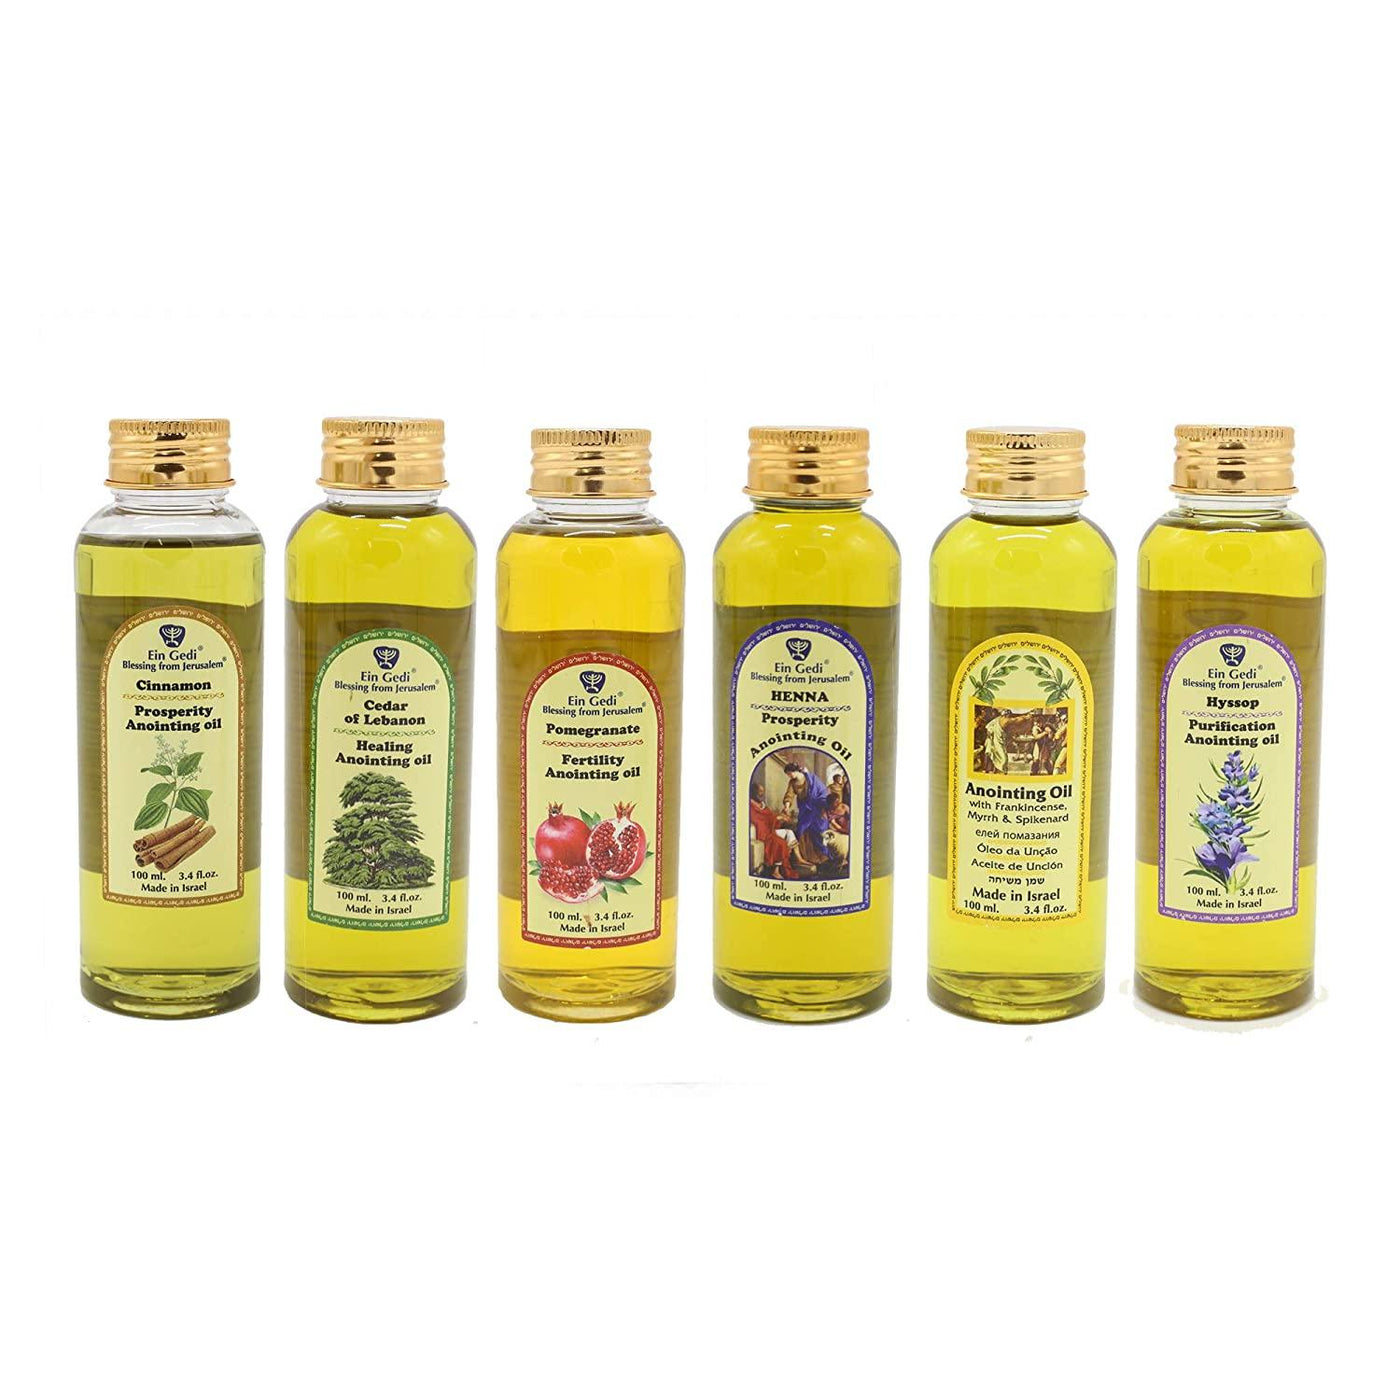 Lot of 6 x Diffrent Anointing Oil 100 ml - 3.4 fl.oz from Holy Land Jerusalem - Spring Nahal